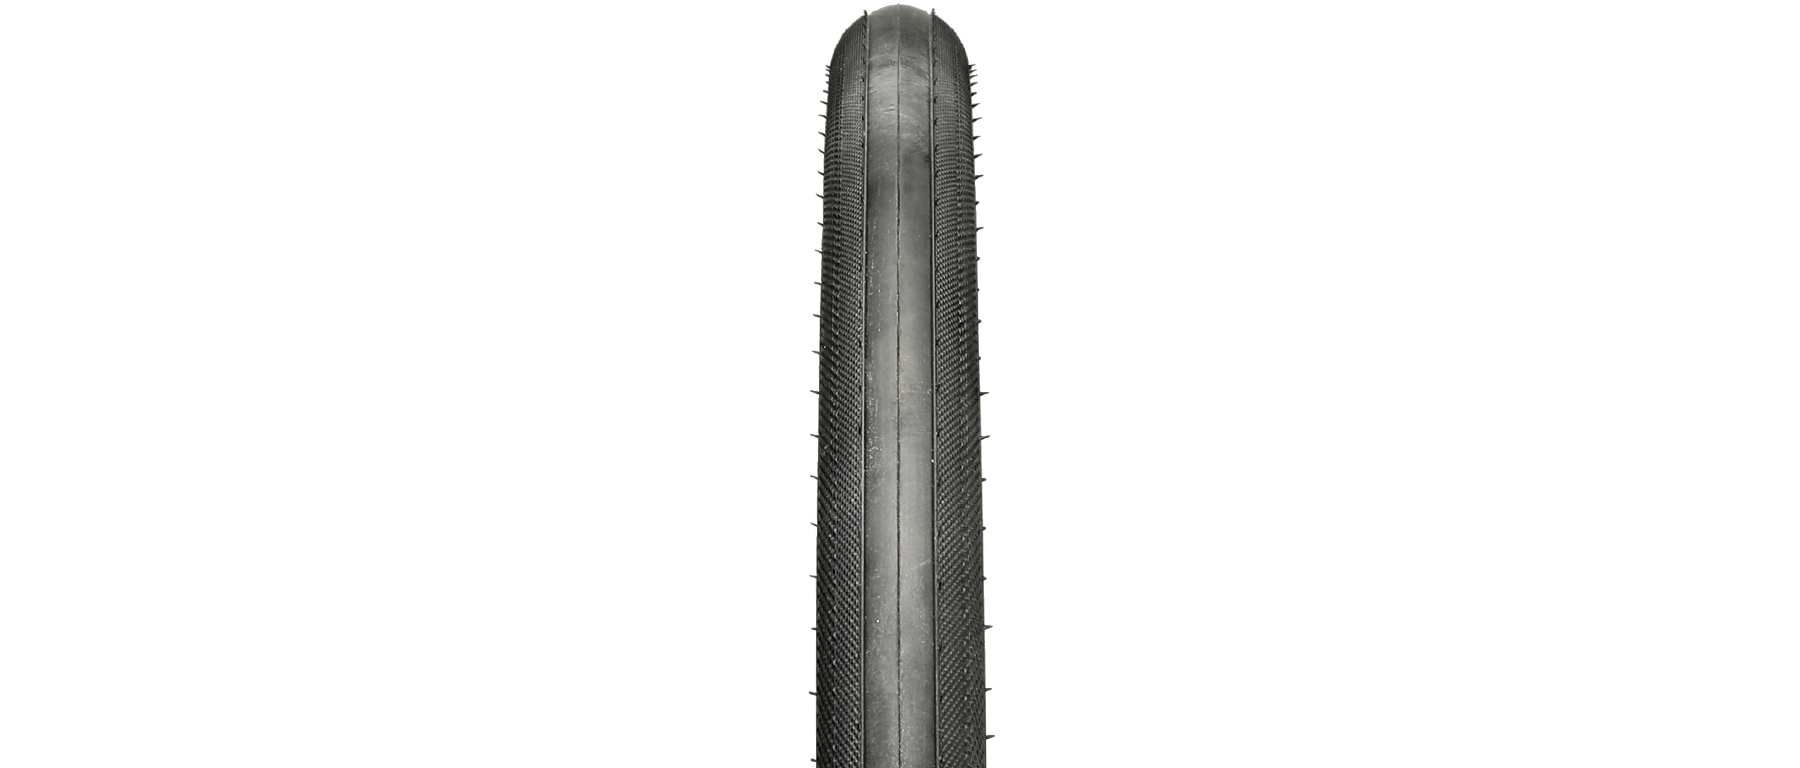 Hutchinson Sector 32 Tubeless Tire OE 2-Pack